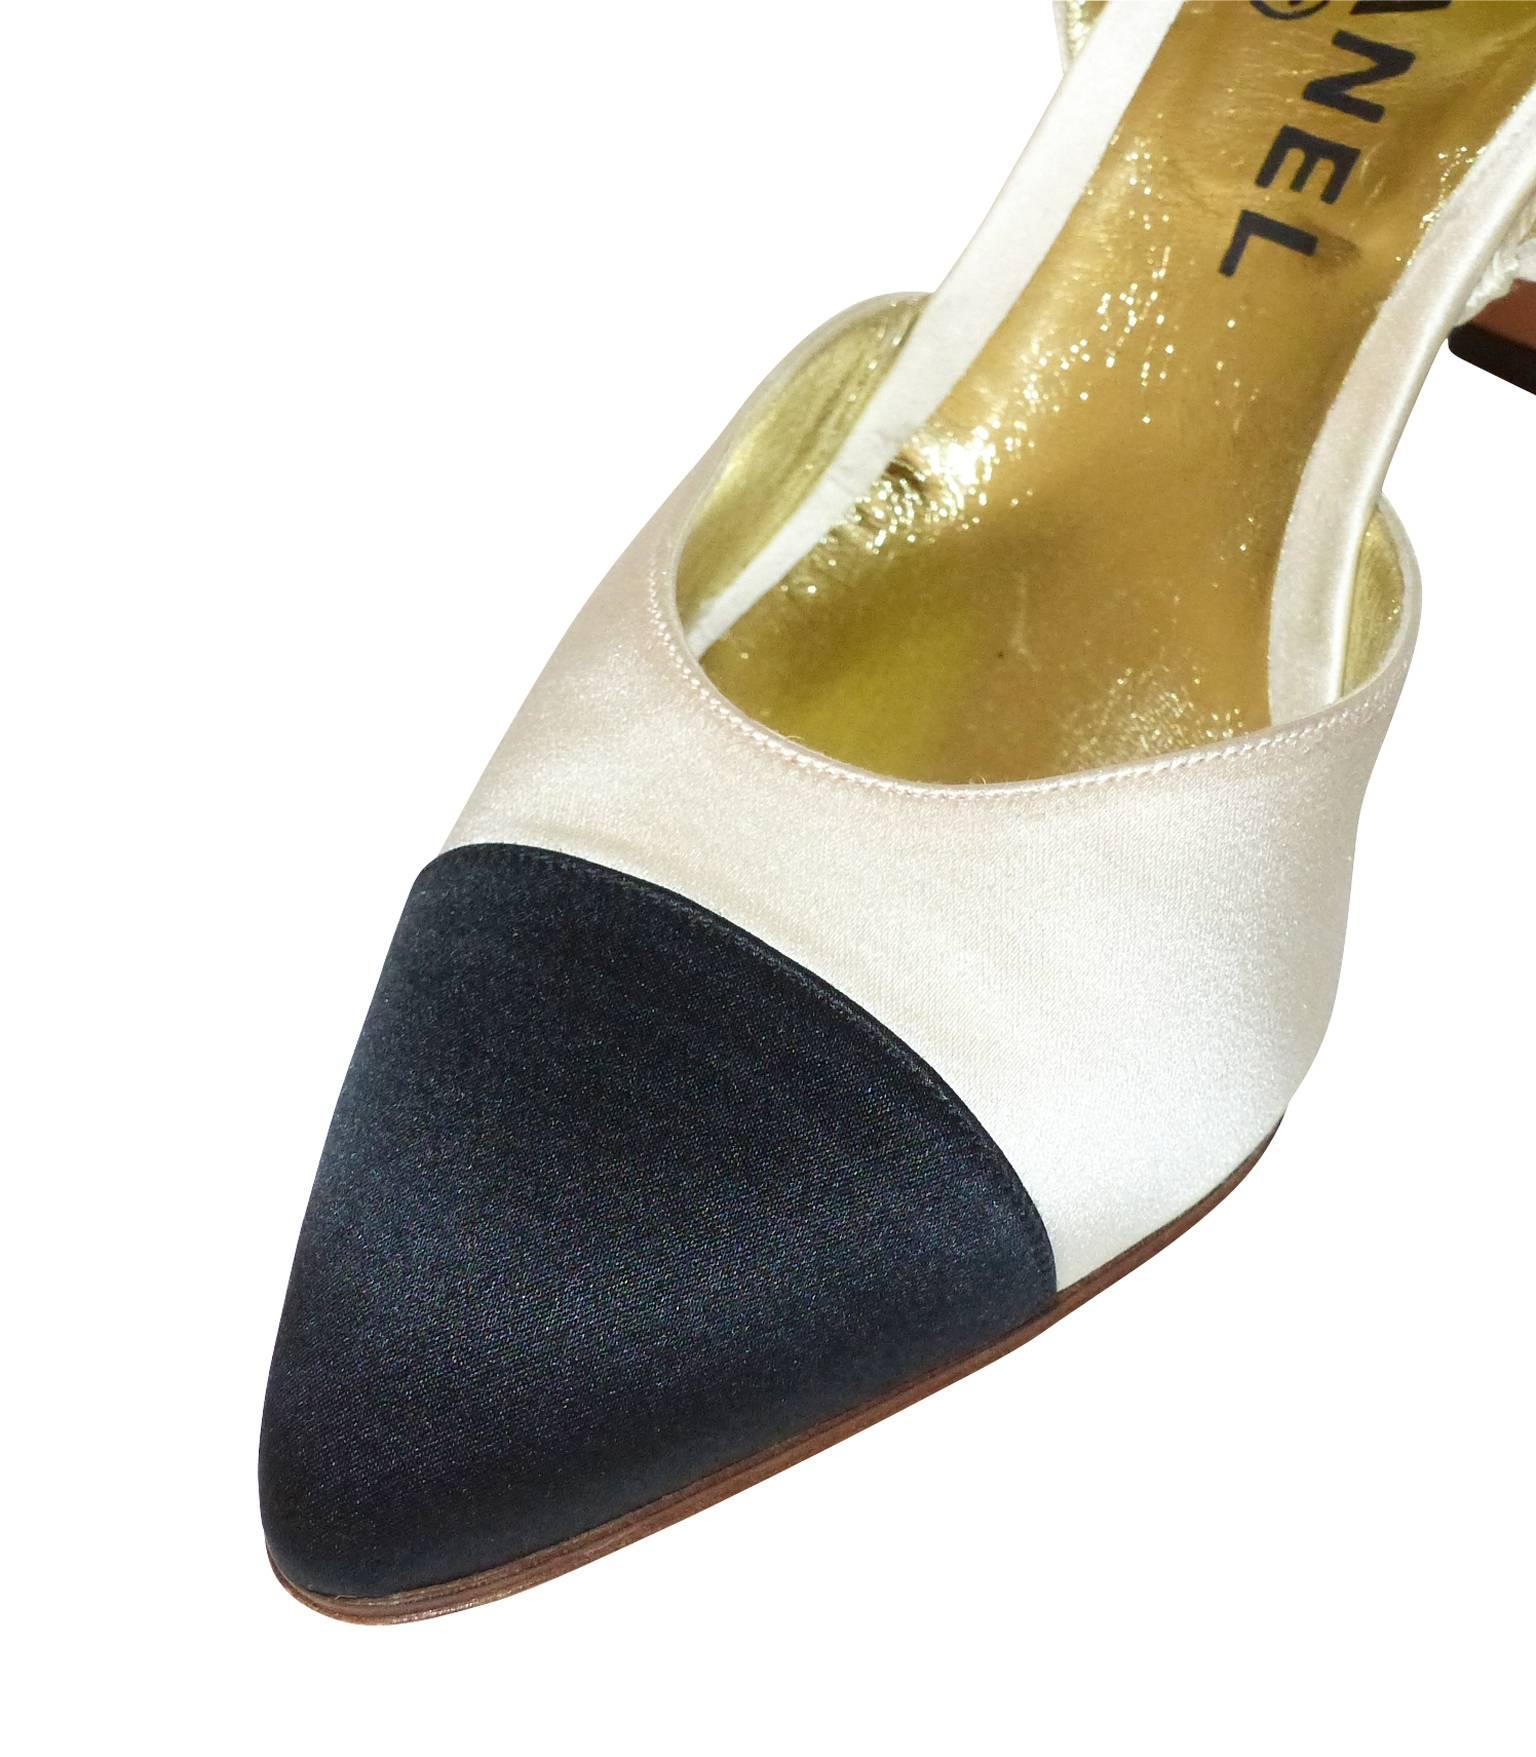 Beige COLLECTOR Chanel Pumps Bicolor Black and Ivoire Satin size 37-37.5 / LIKE NEW